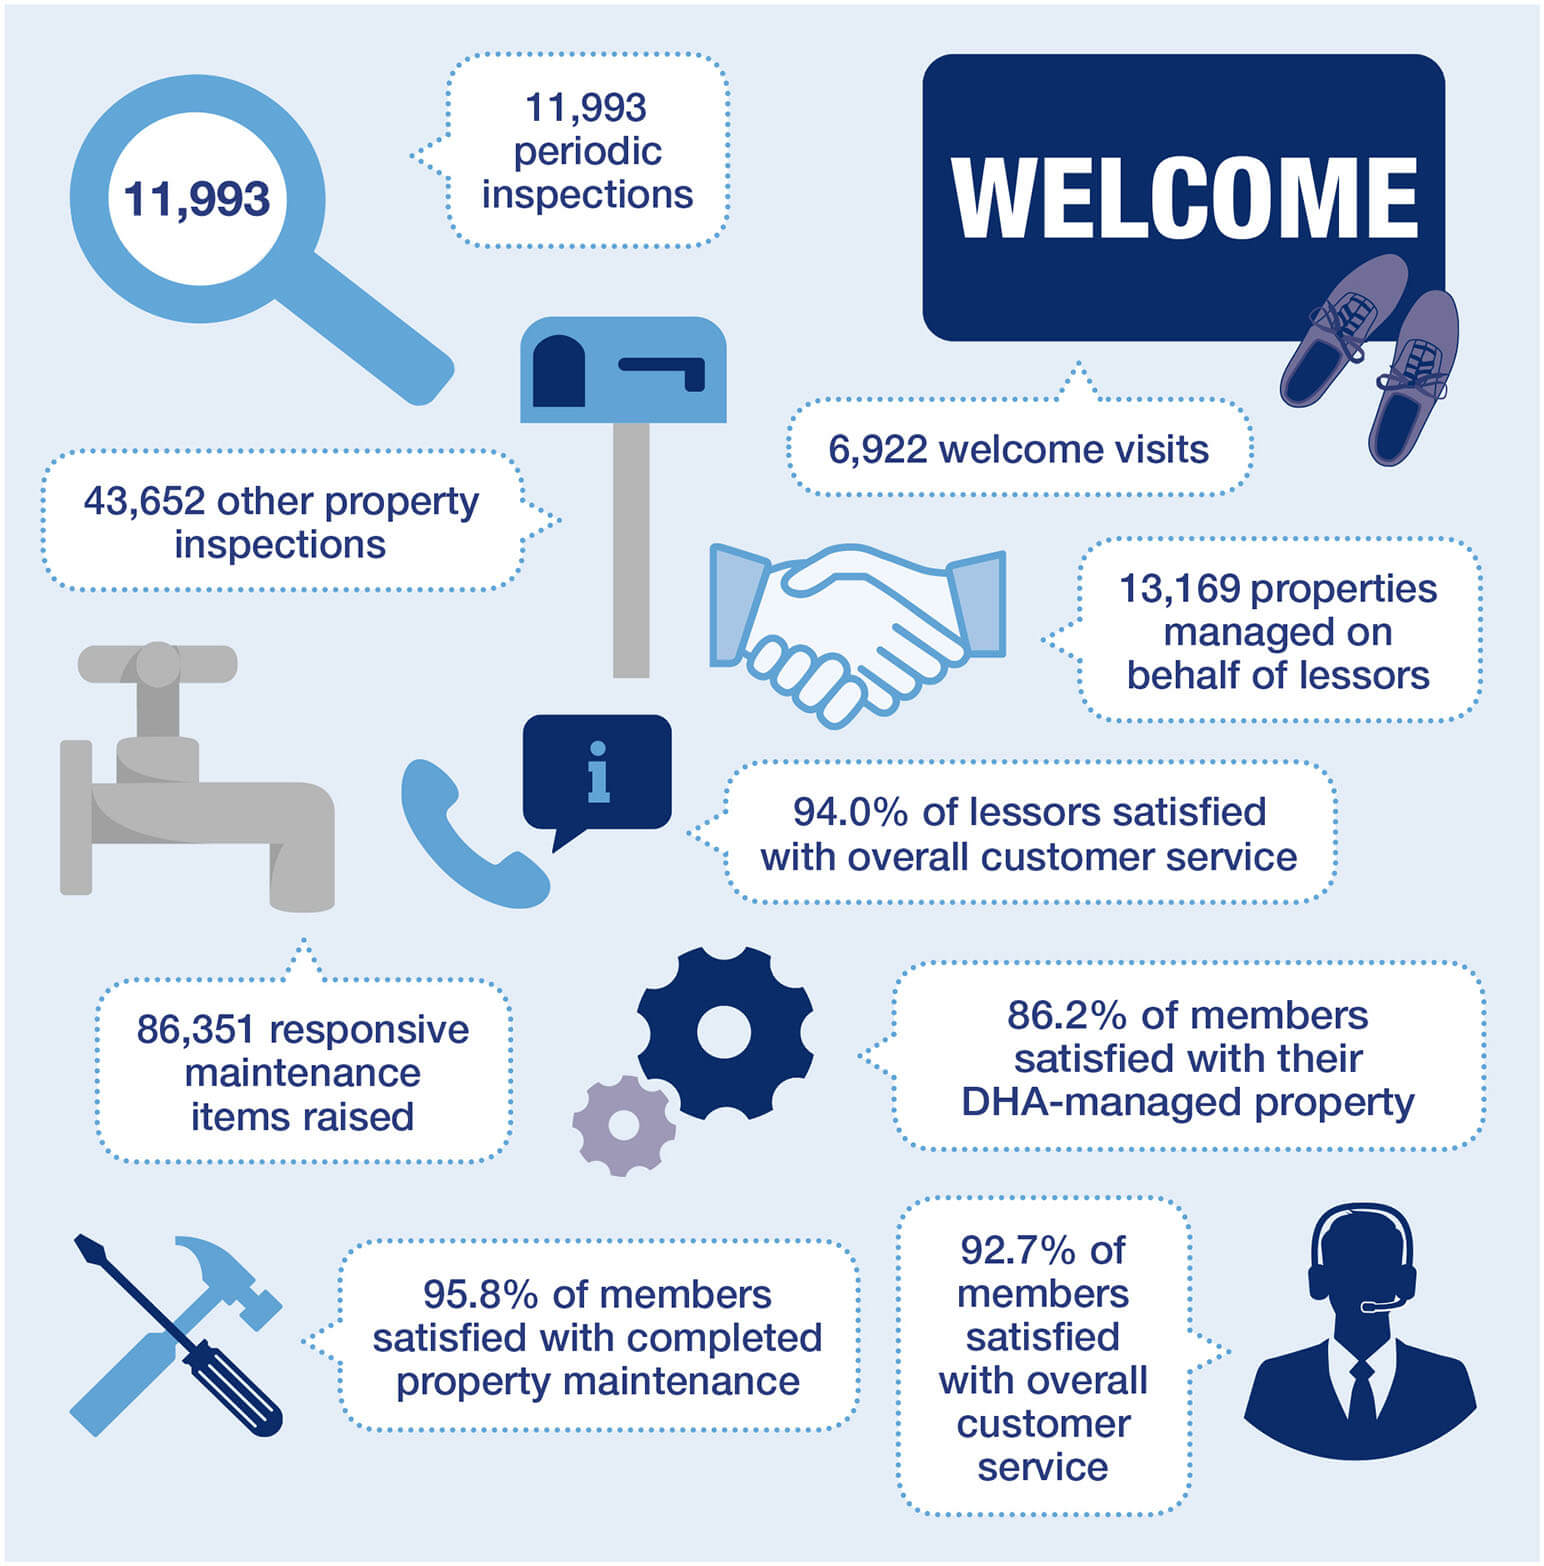 11,993 periodic inspections. 43,652 other property inspections. 6,922 welcome visits. 13,169 properties managed on behalf of lessors. 94.0% of lessors satisfied with overall customer service. 86,351 responsive maintenance items raised. 86.2% of members satisfied with their DHA-managed property. 95.8% of members satisfied with completed property maintenance. 92.7% of members satisfied with overall customer service.